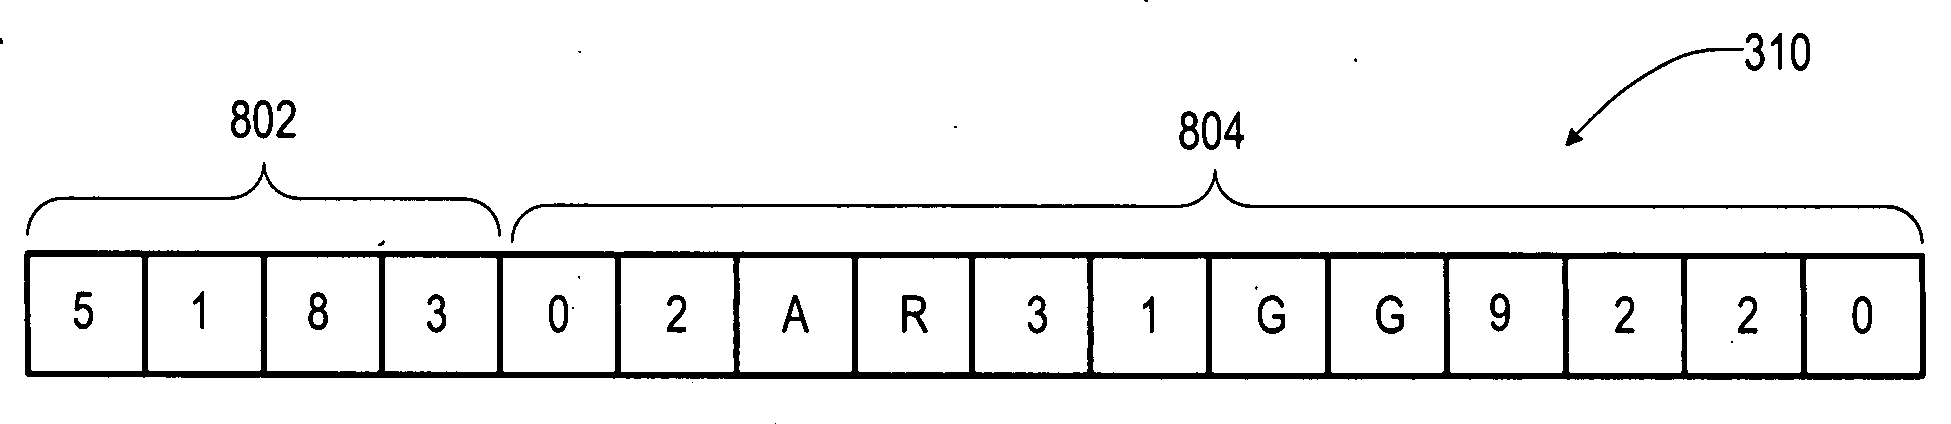 Methods and apparatus for a wireless terminal with third party advertising: authentication methods